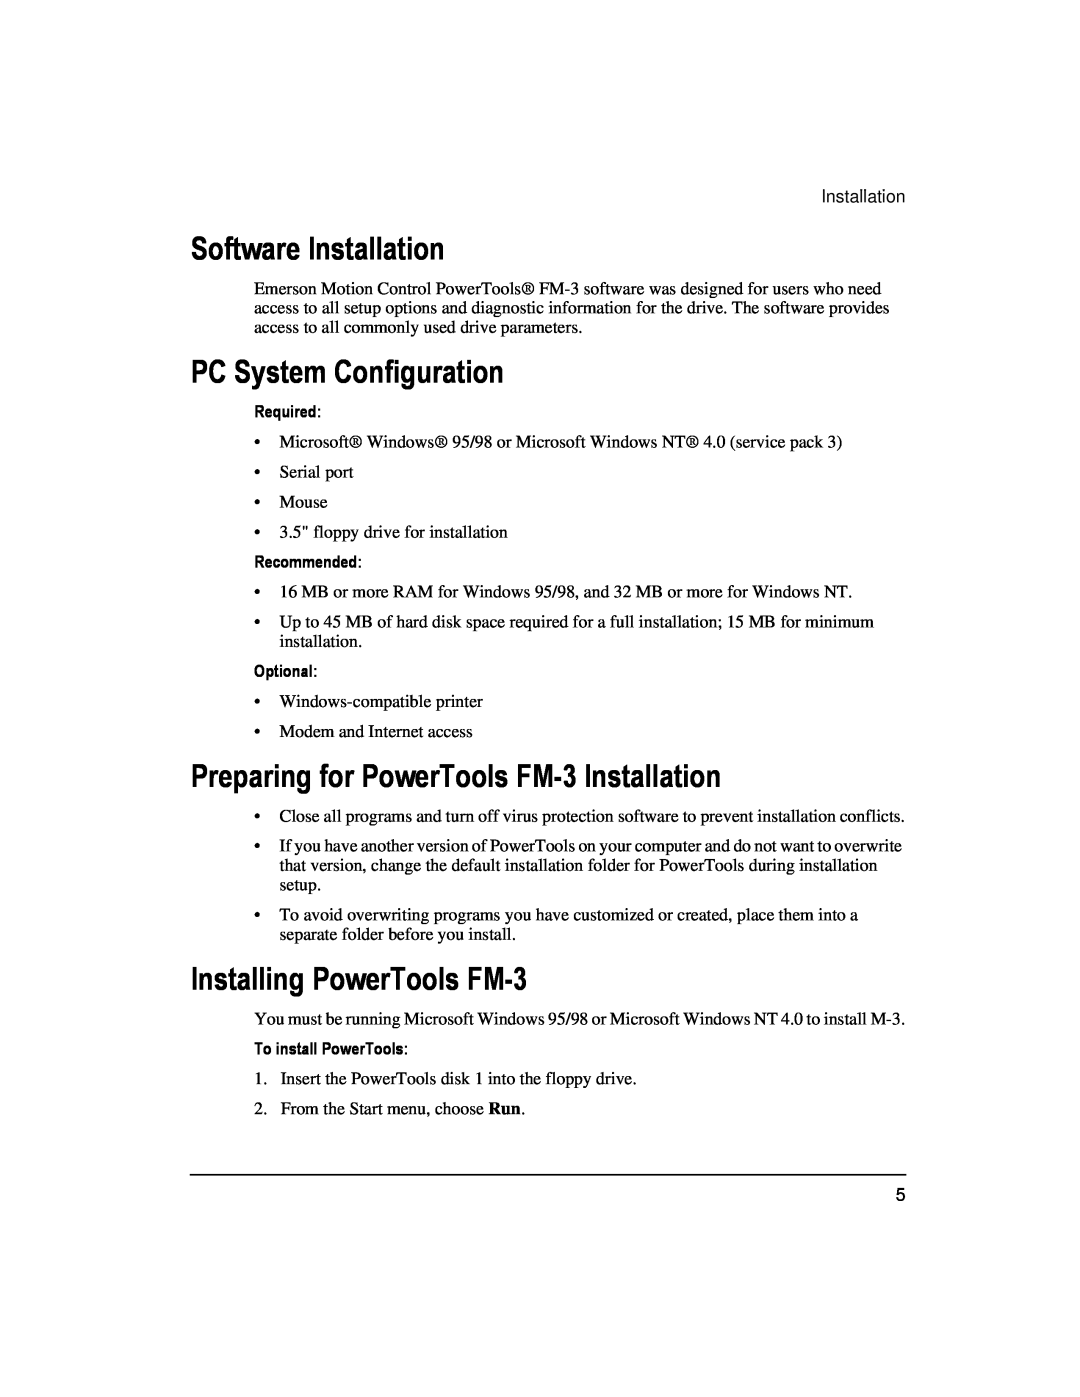 Emerson 400508-02 Software Installation, PC System Configuration, Preparing for PowerTools FM-3 Installation, Required 